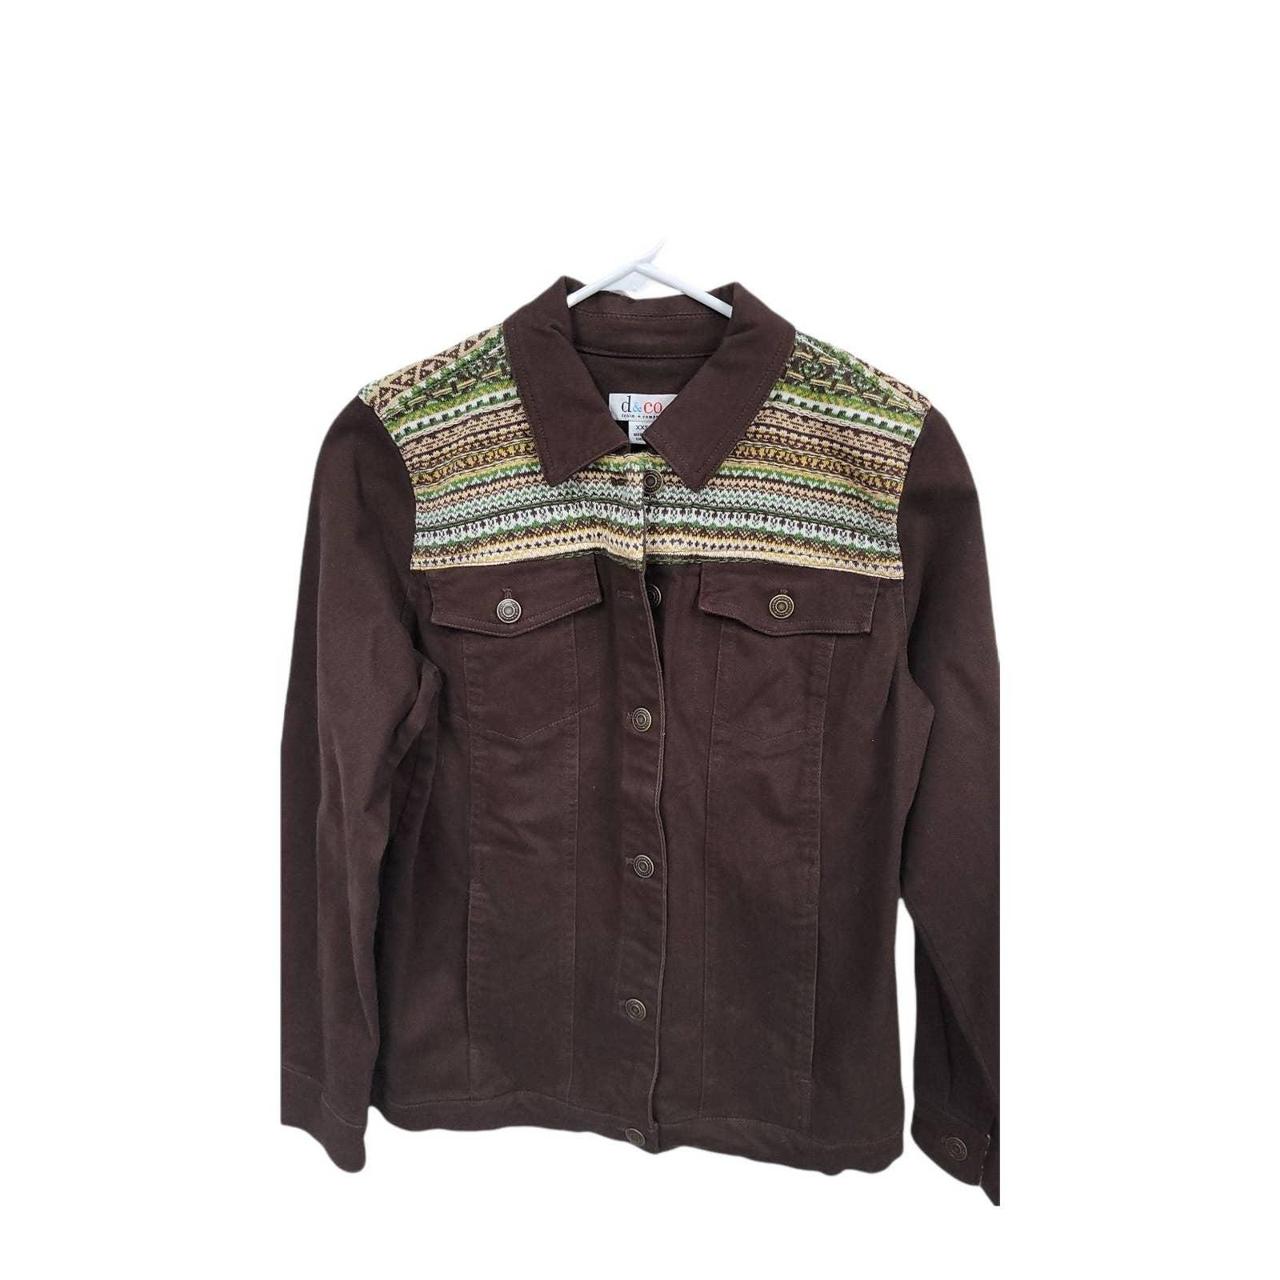 Men's Rancher Jacket | Jackets by Outback Trading Company |  OutbackTrading.com